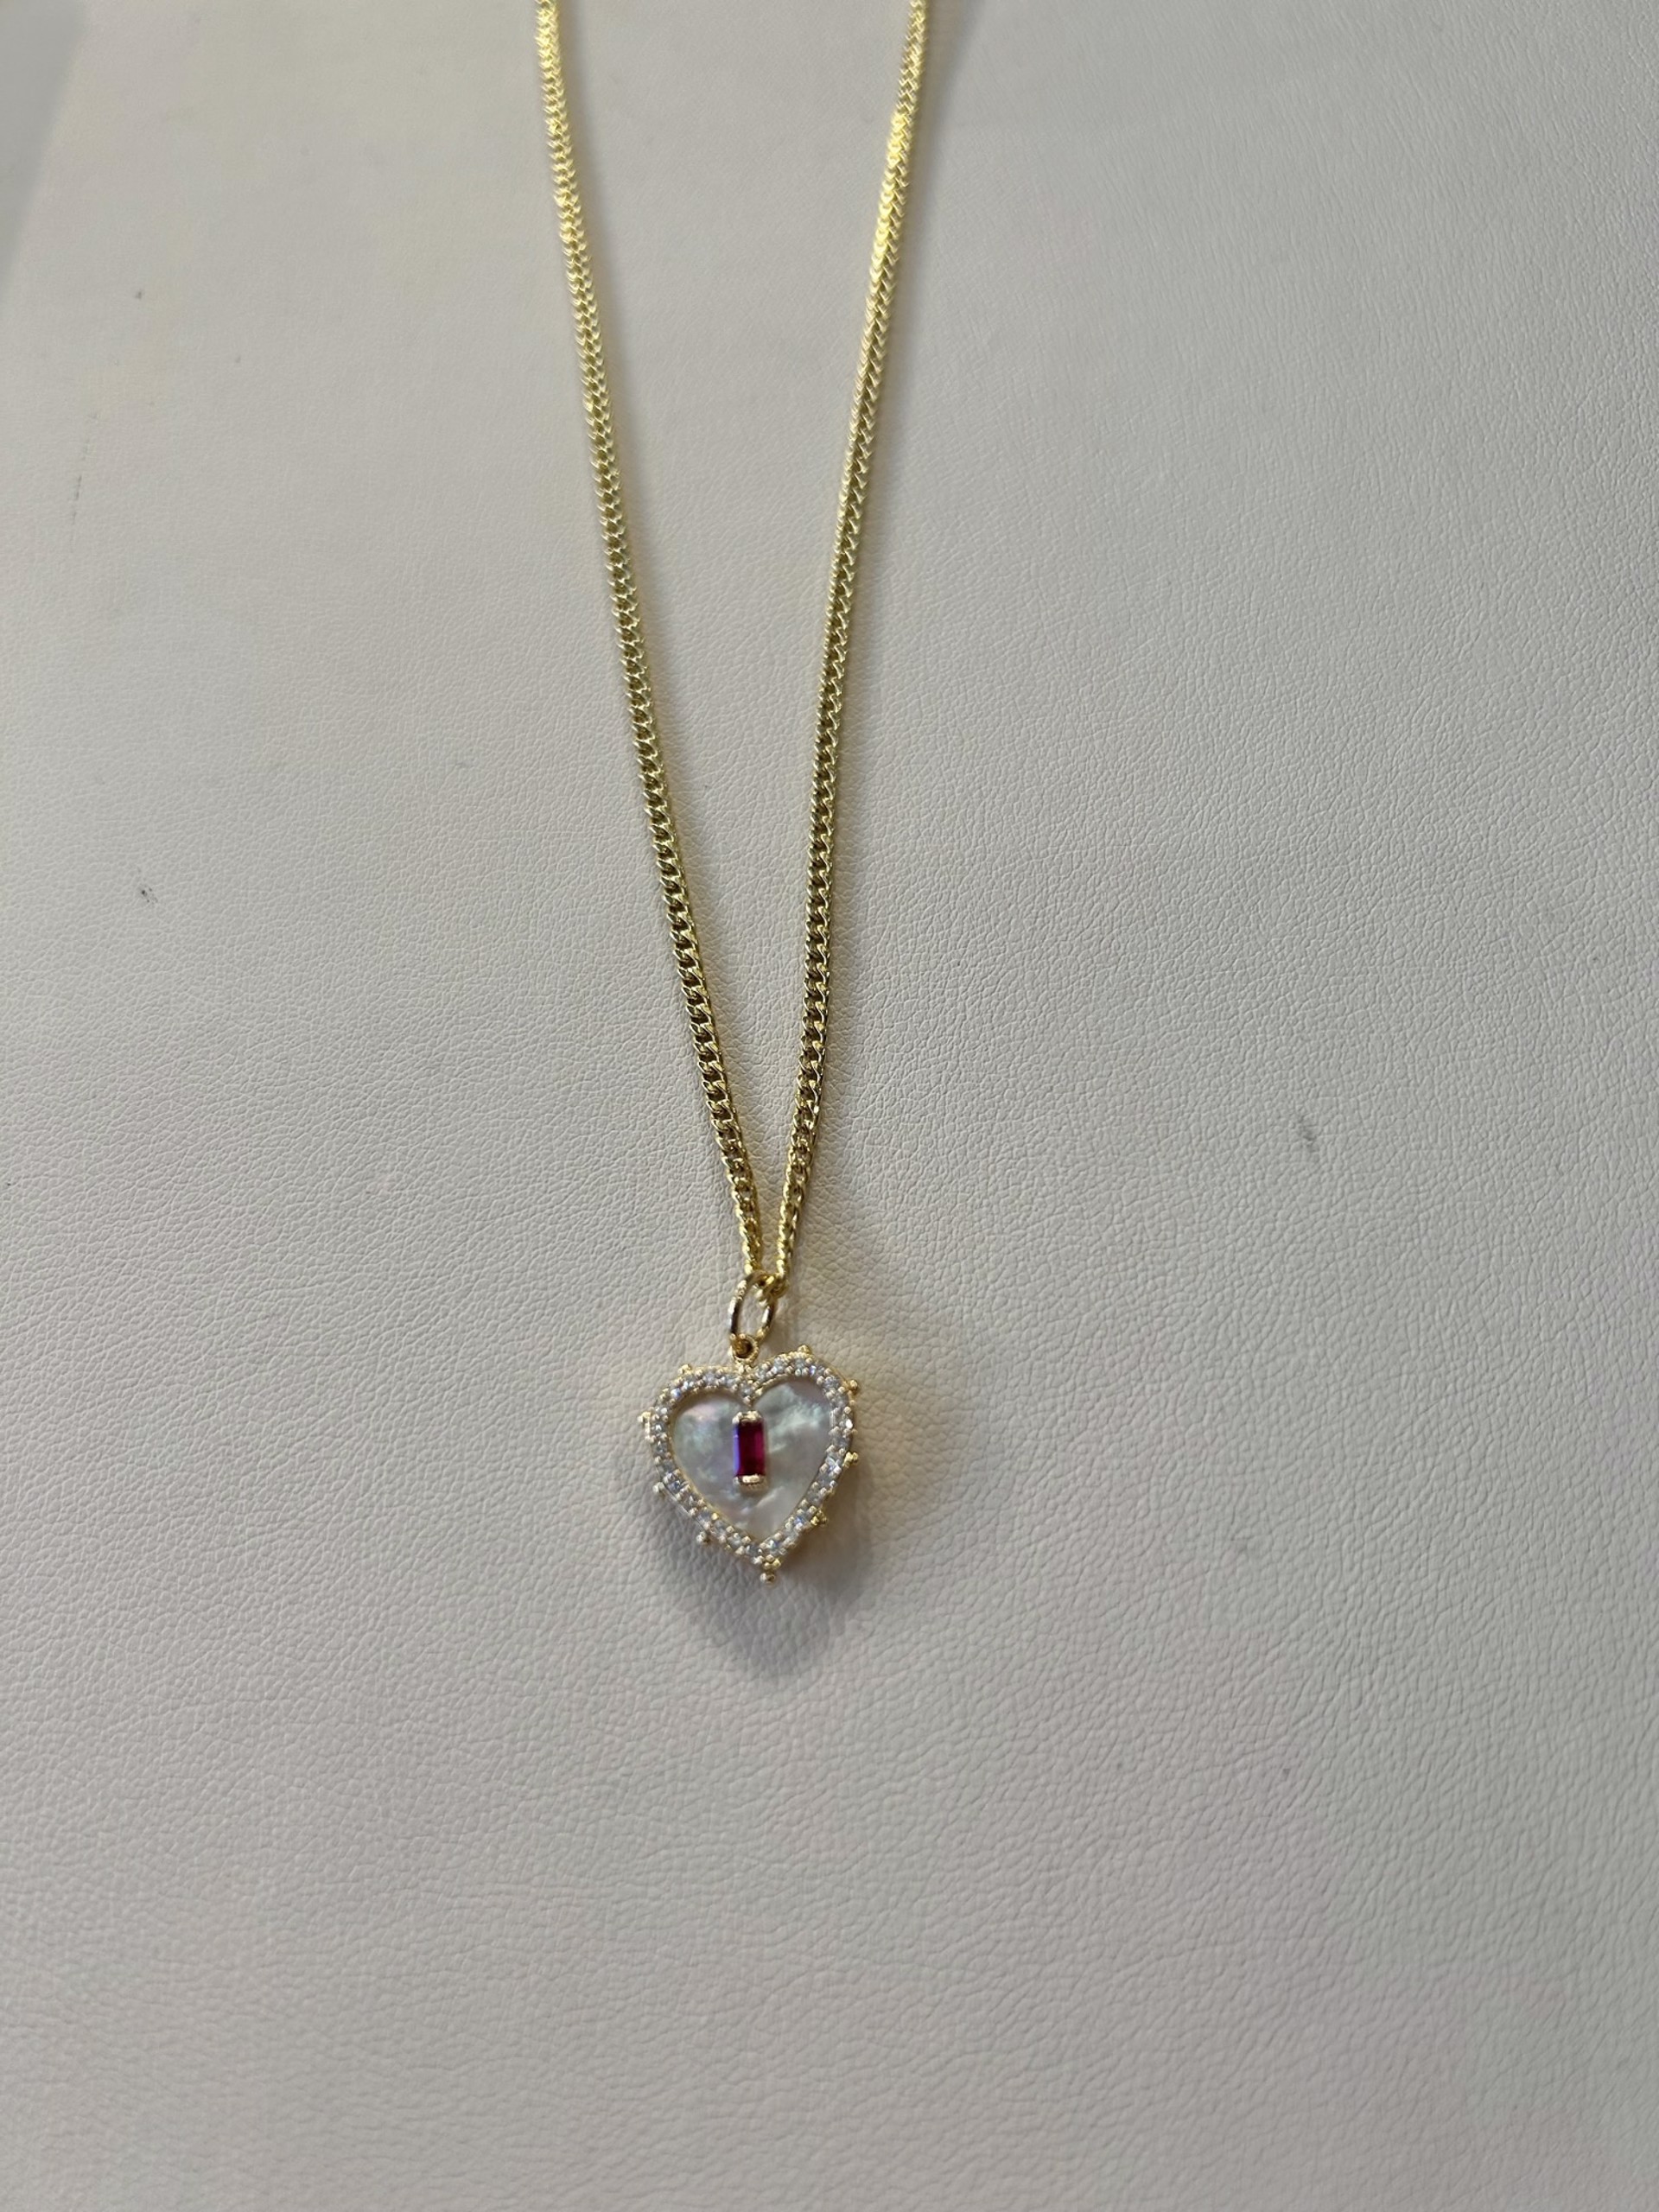 KB-N15 14k Gold Necklace with gold diamond and pearl heart pendant with a ruby baguette by Karen Birchmier